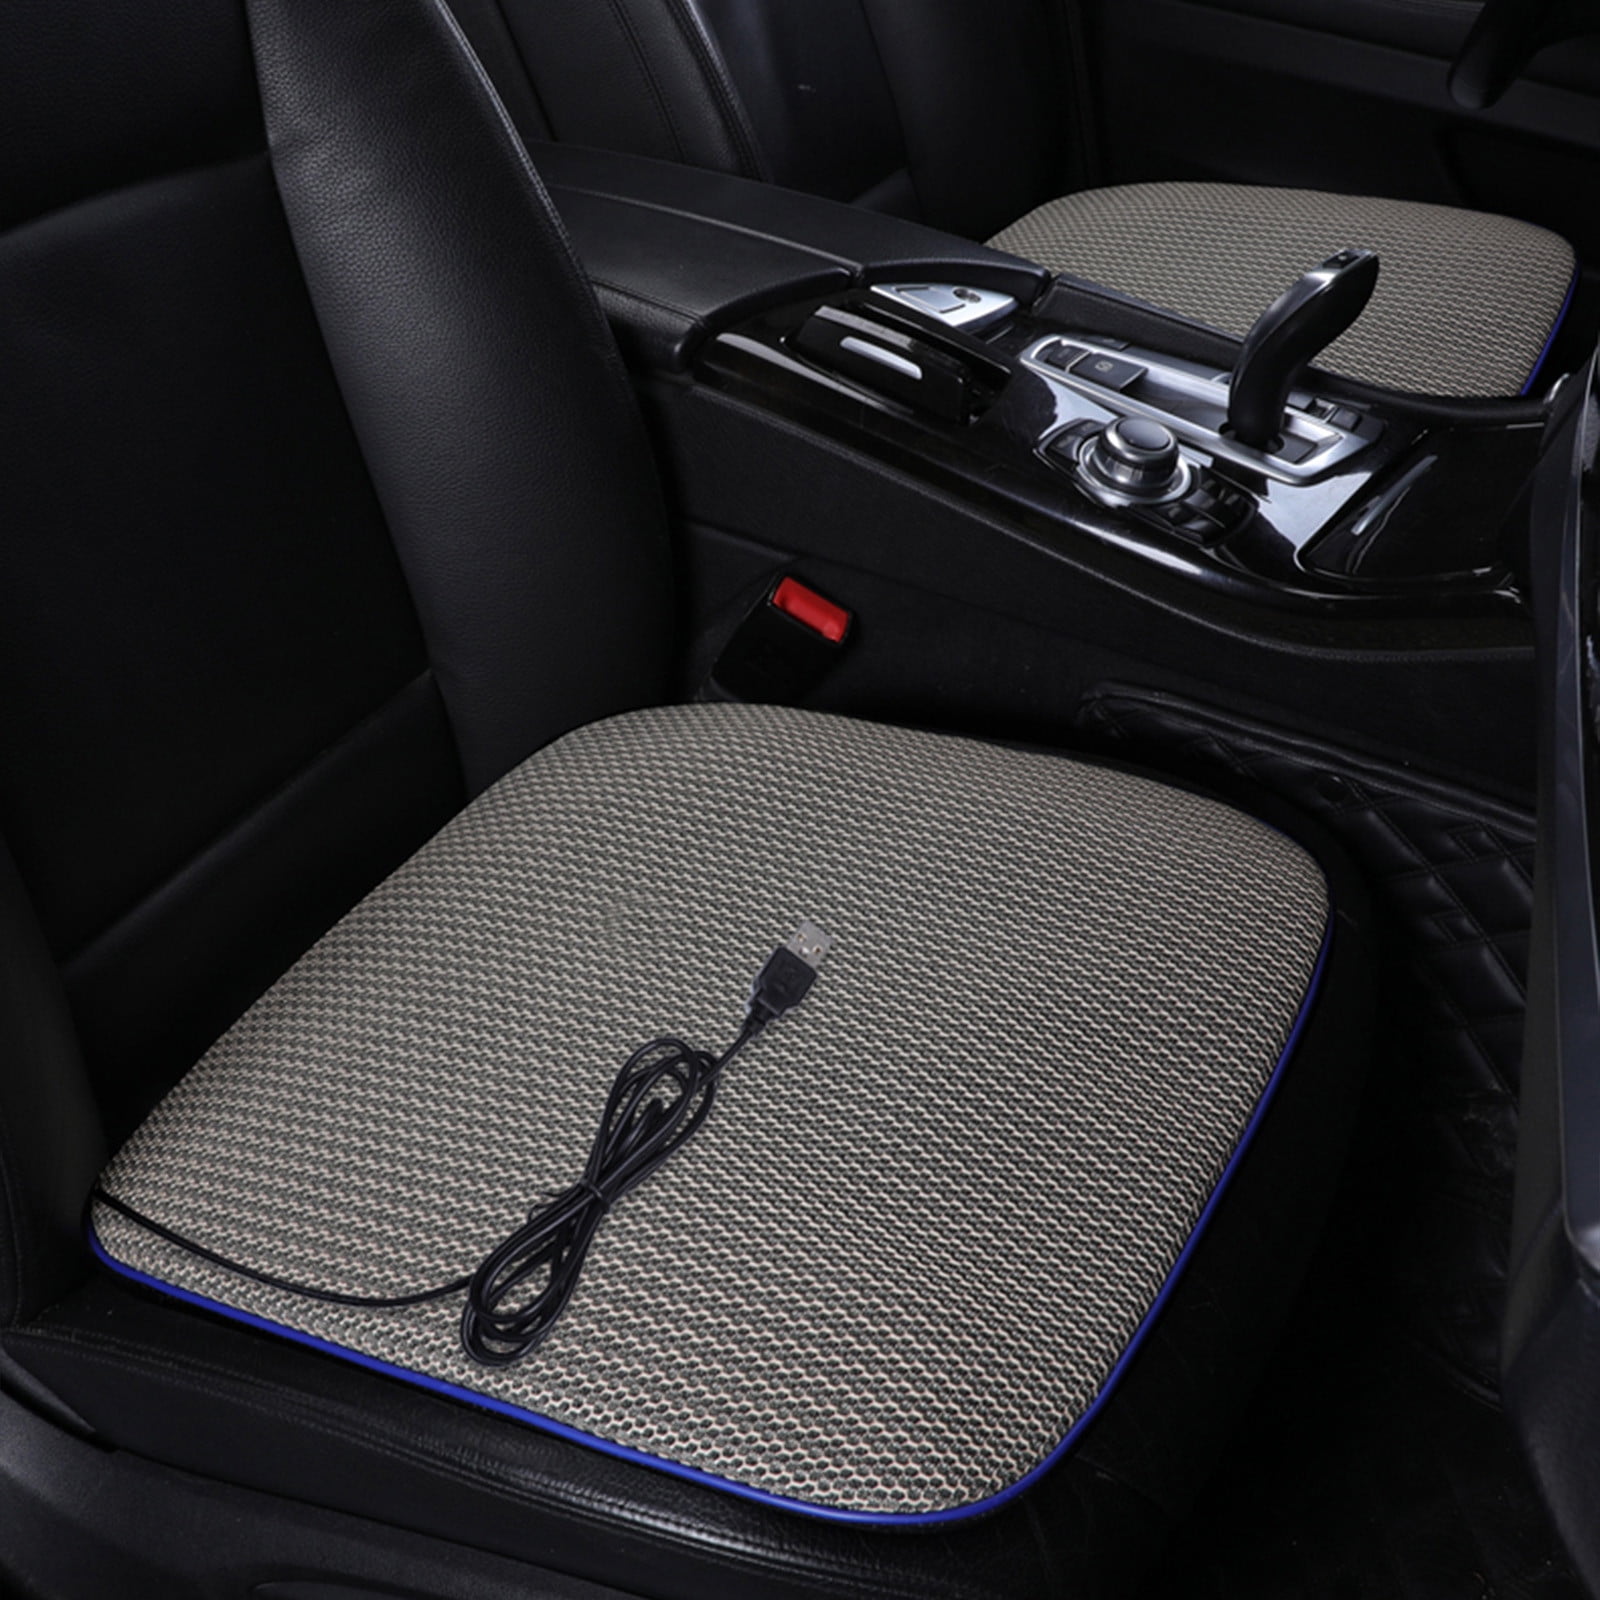 Cooling Car Seat Cushion,Summer Ventilated Seat Cushion with USB Port, Automotive Adjustable Temperature Comfortable Cooling Car Seat Cushion,Universal Front Seat Covers Fit for Most Sedans